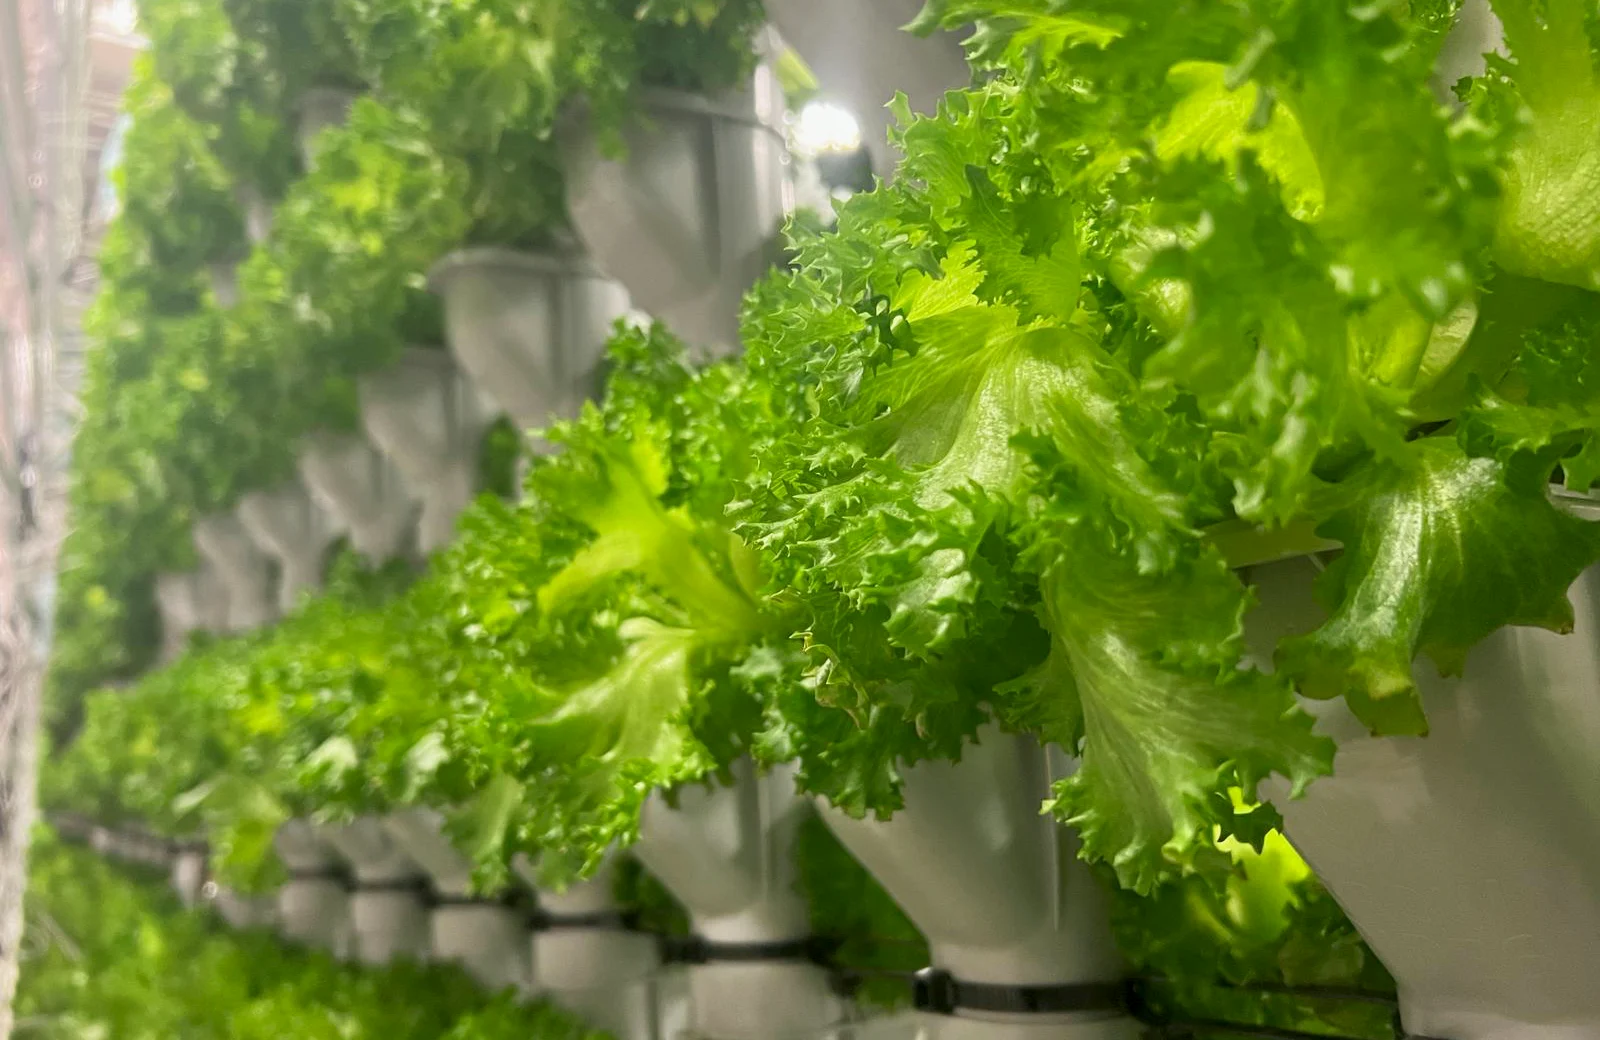 Growpipes vertical farming solution